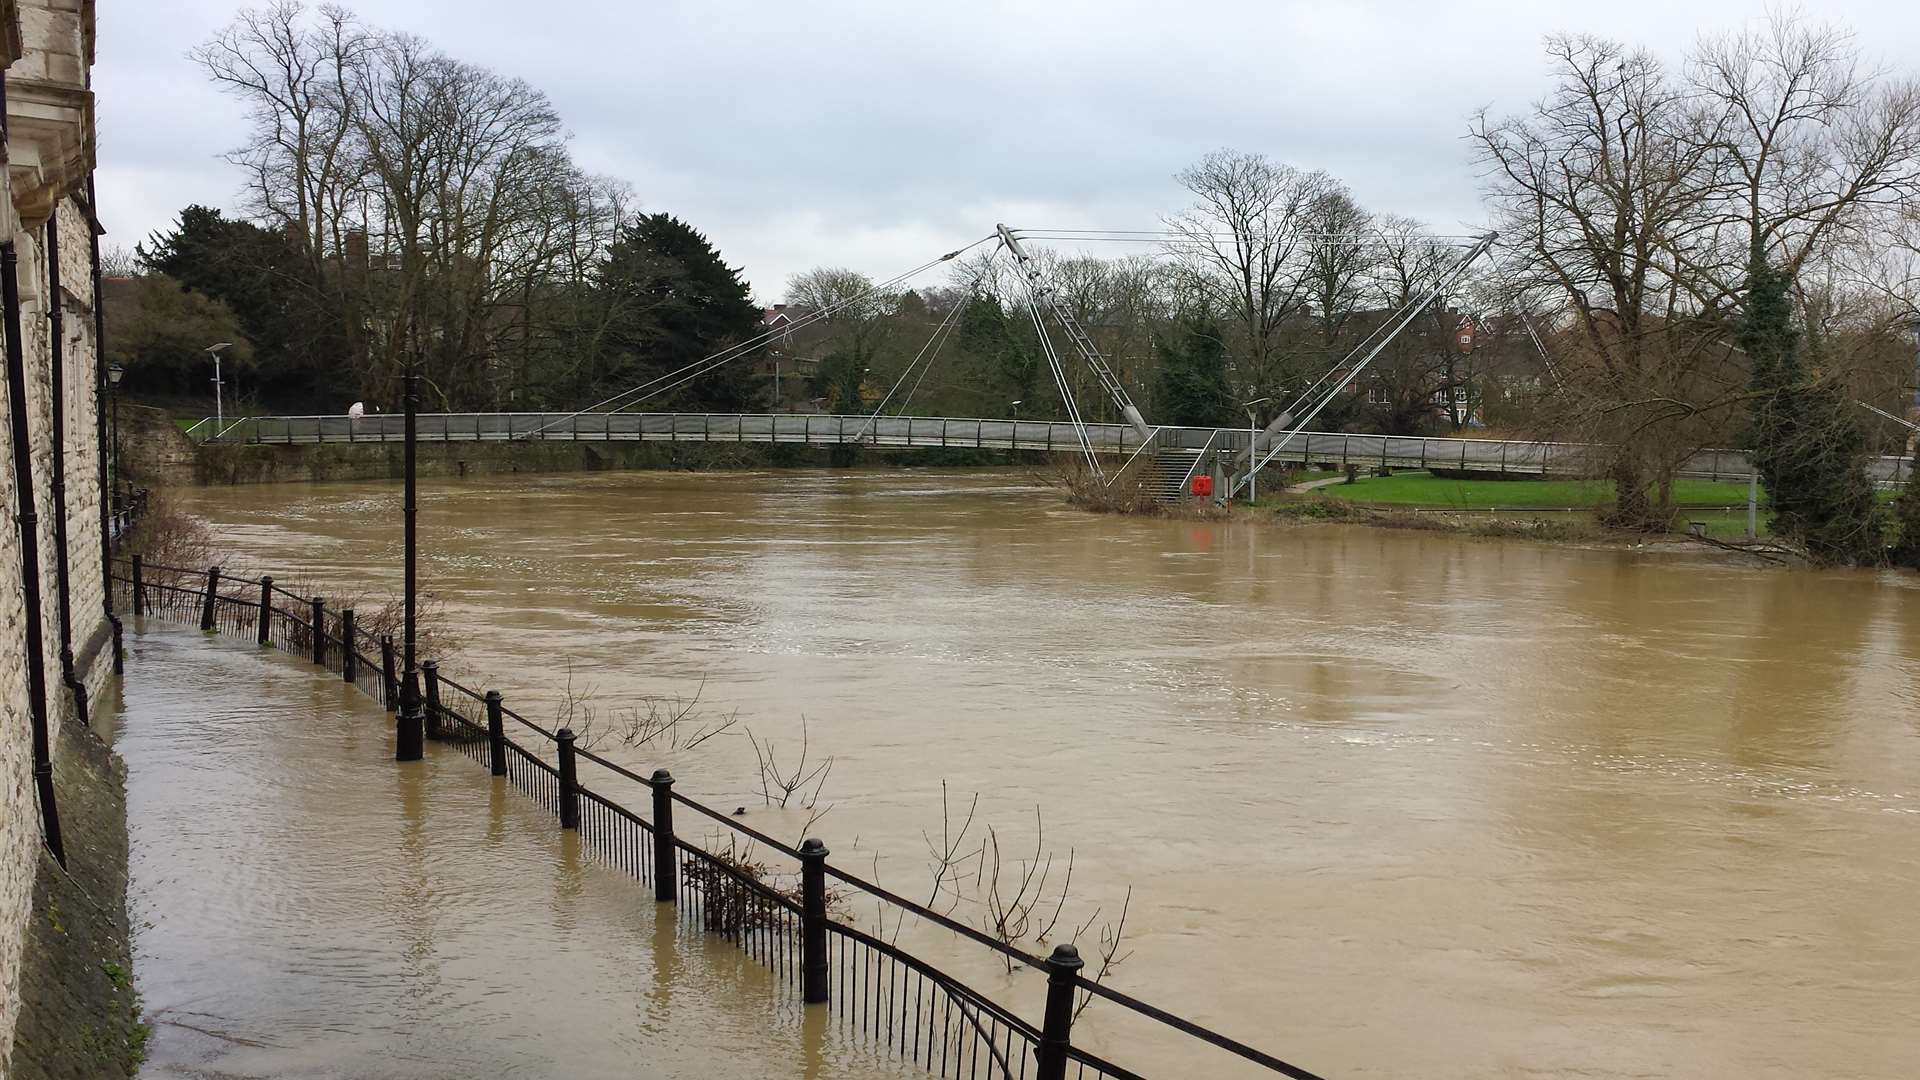 The River Medway overflows in Maidstone this morning